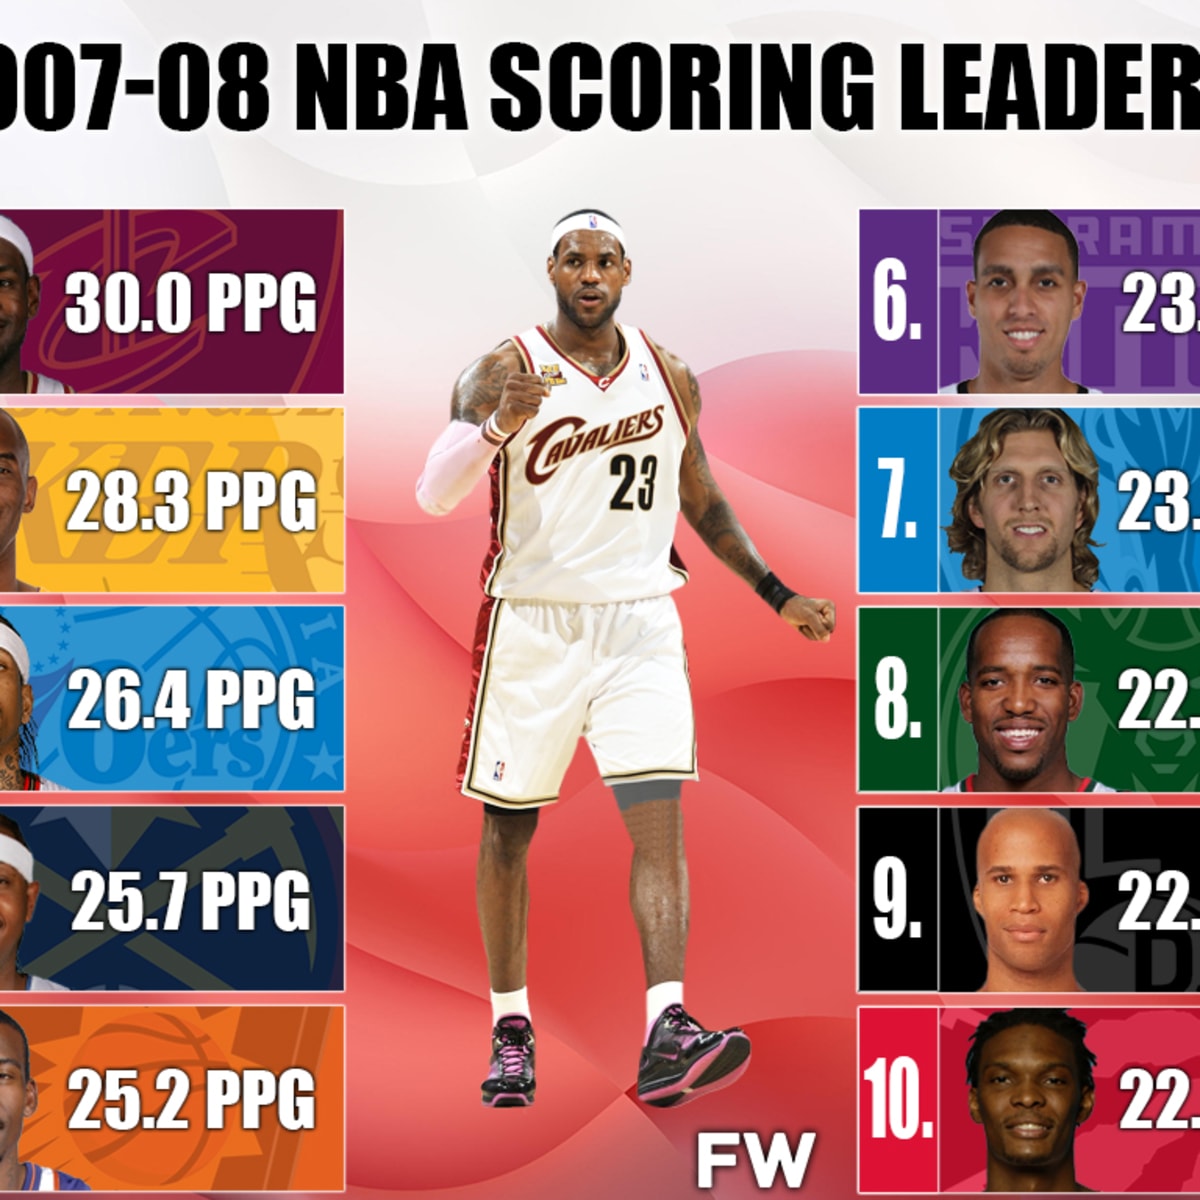 rudy gay stats since 2006 with lebron james